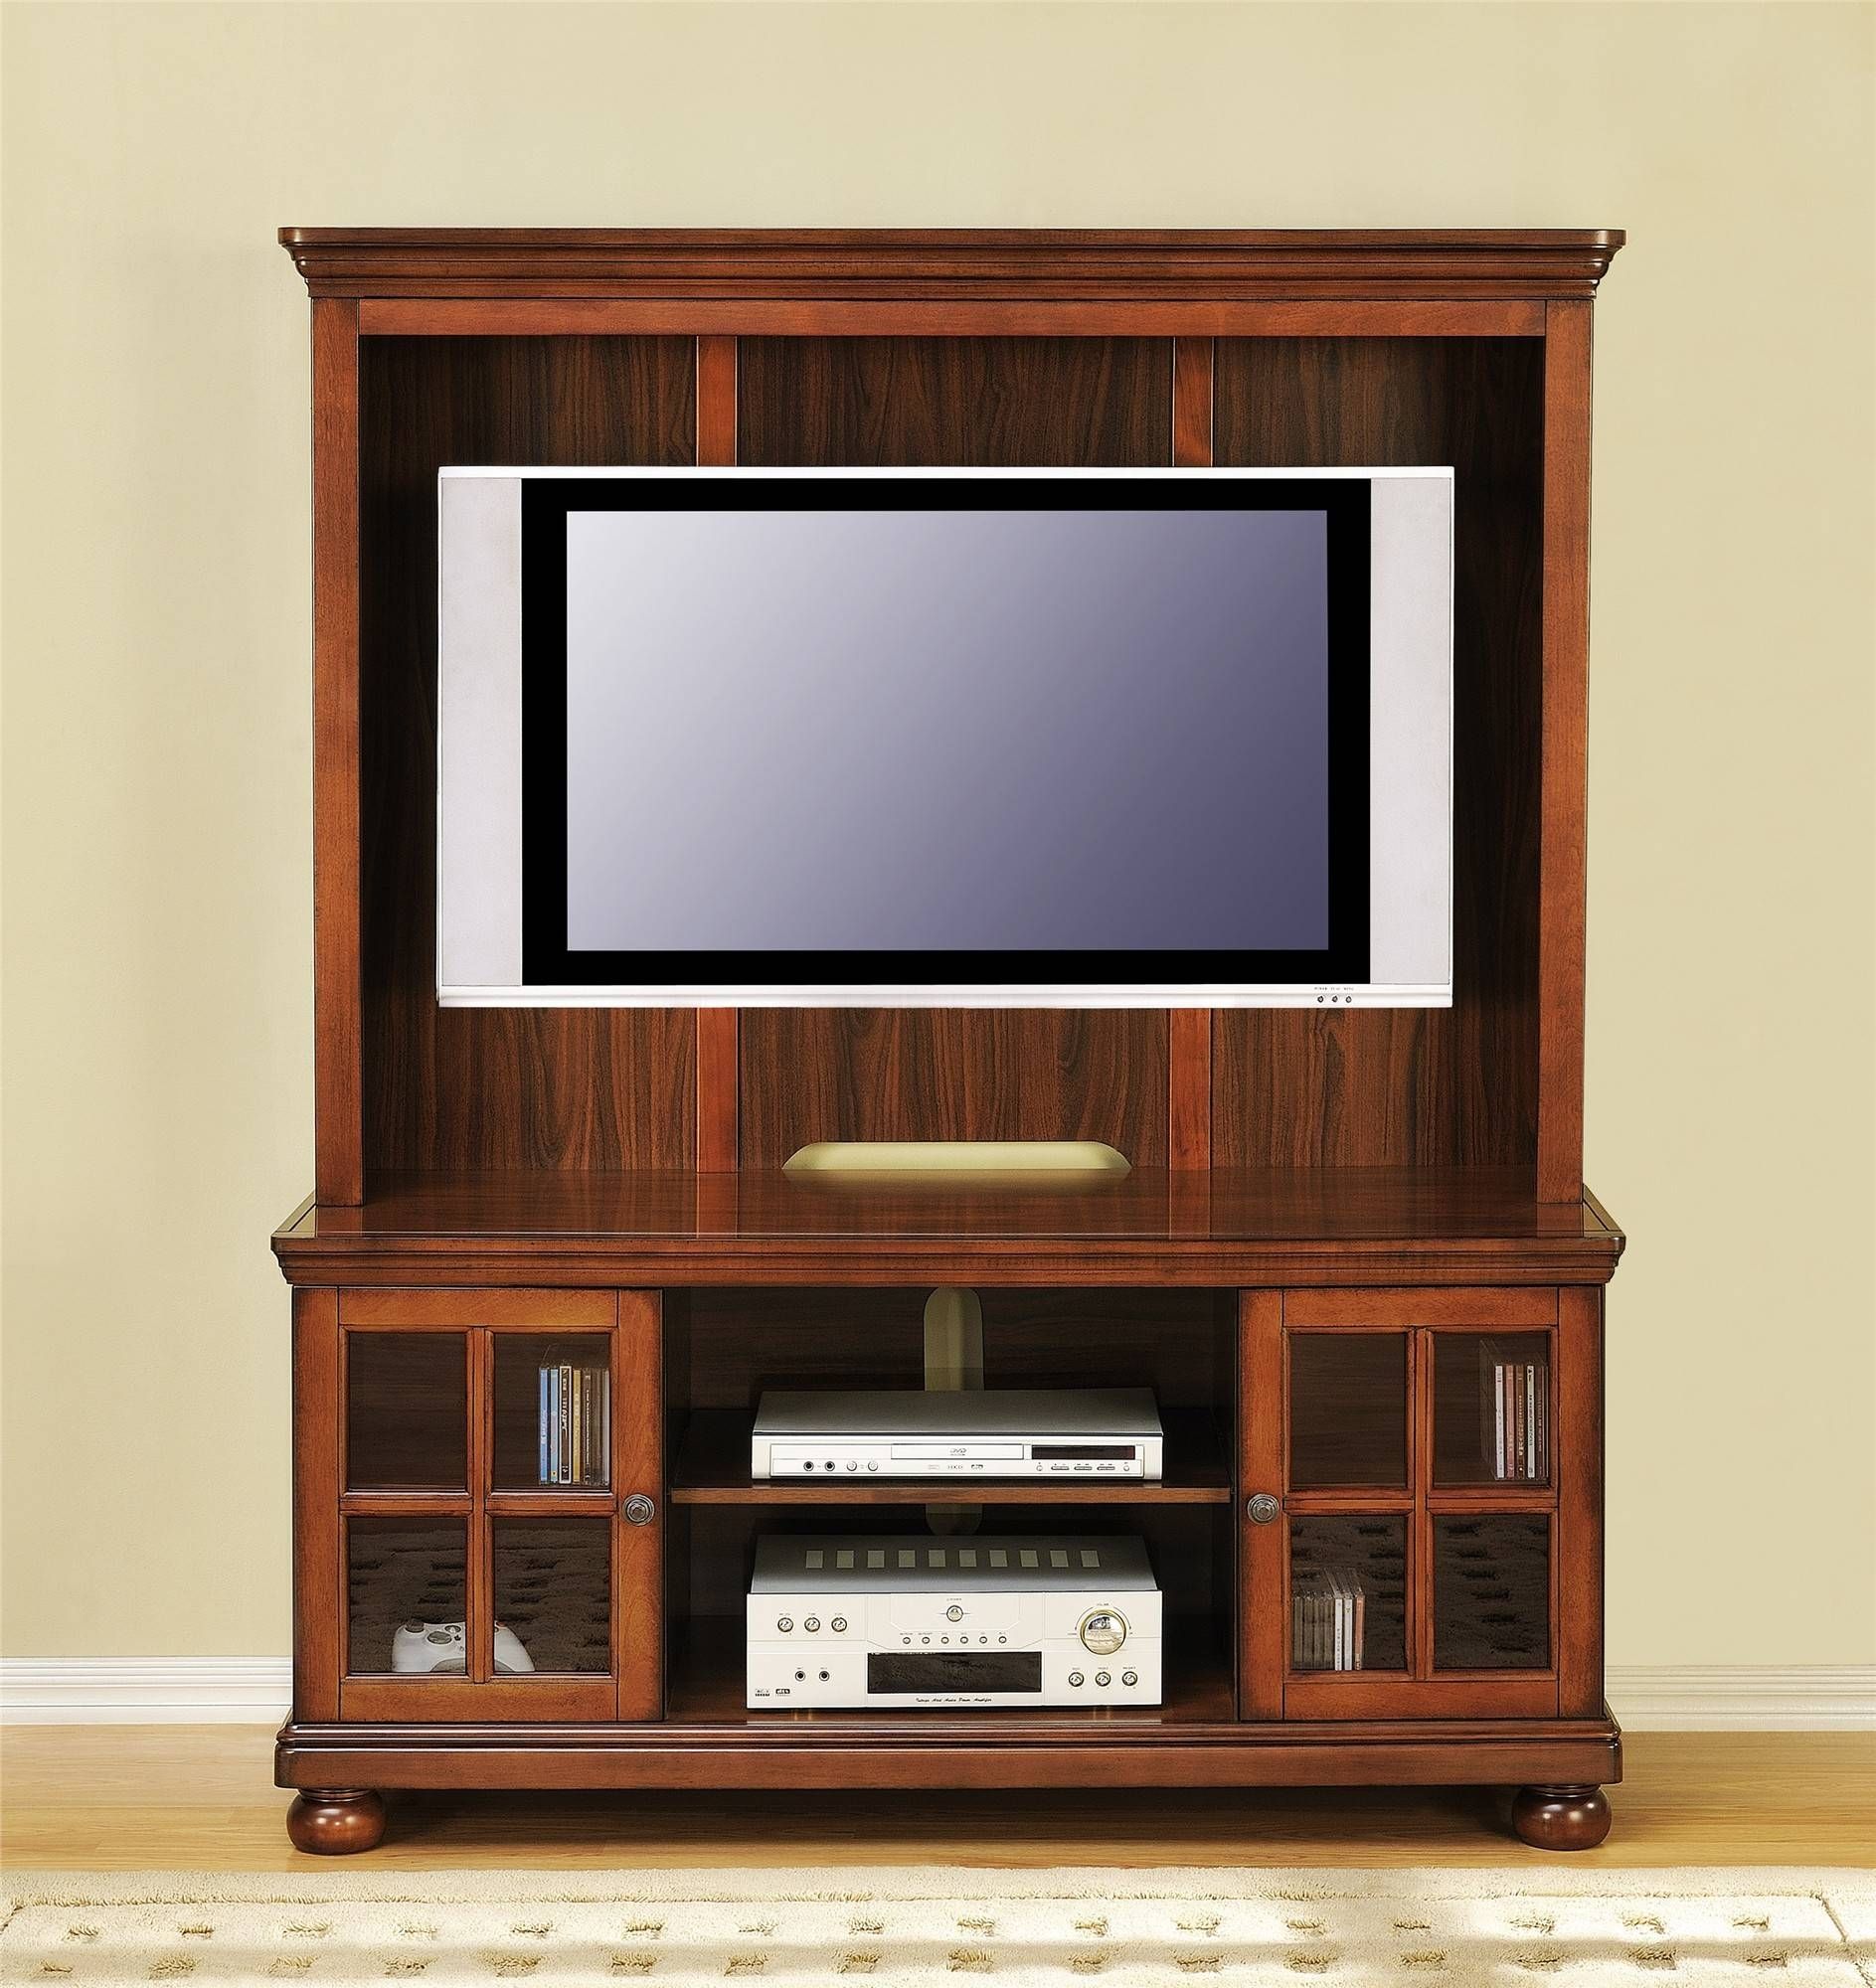 Tall Brown Santos Mahogany Wood Media Cabinet With Mounted Flat In Oak Tv Cabinets For Flat Screens 